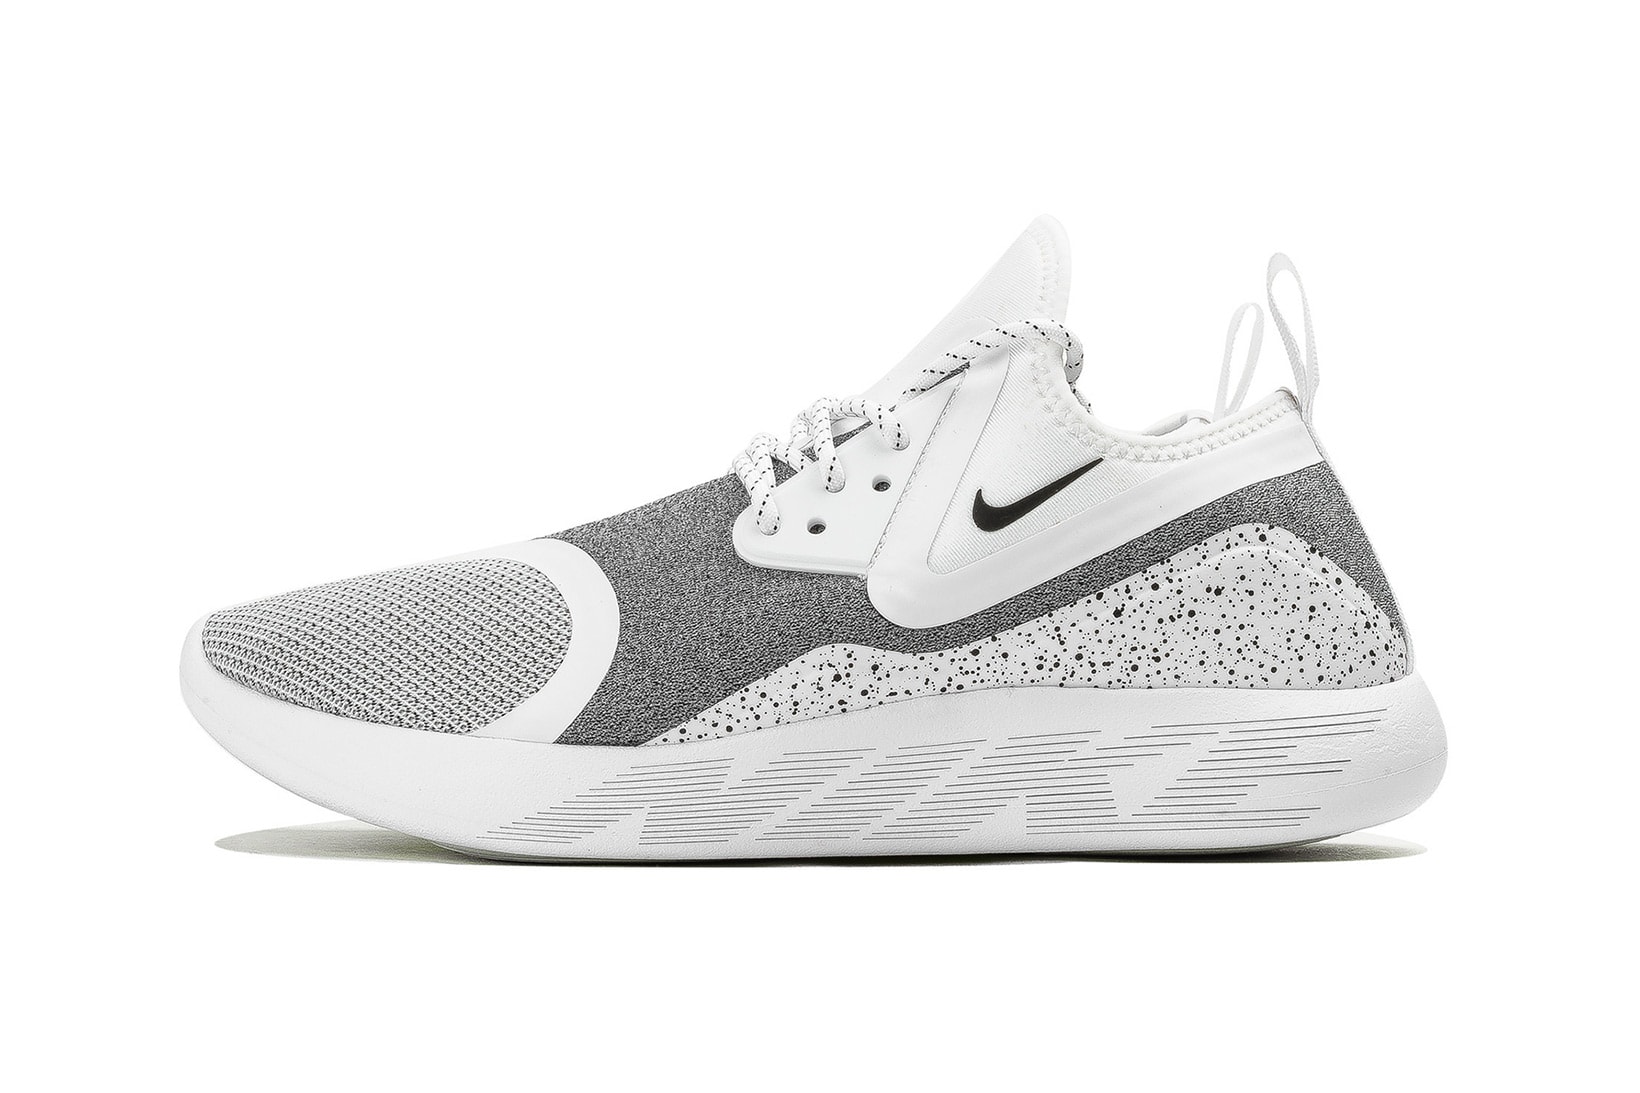 Nike LunarCharge Essential White Speckle